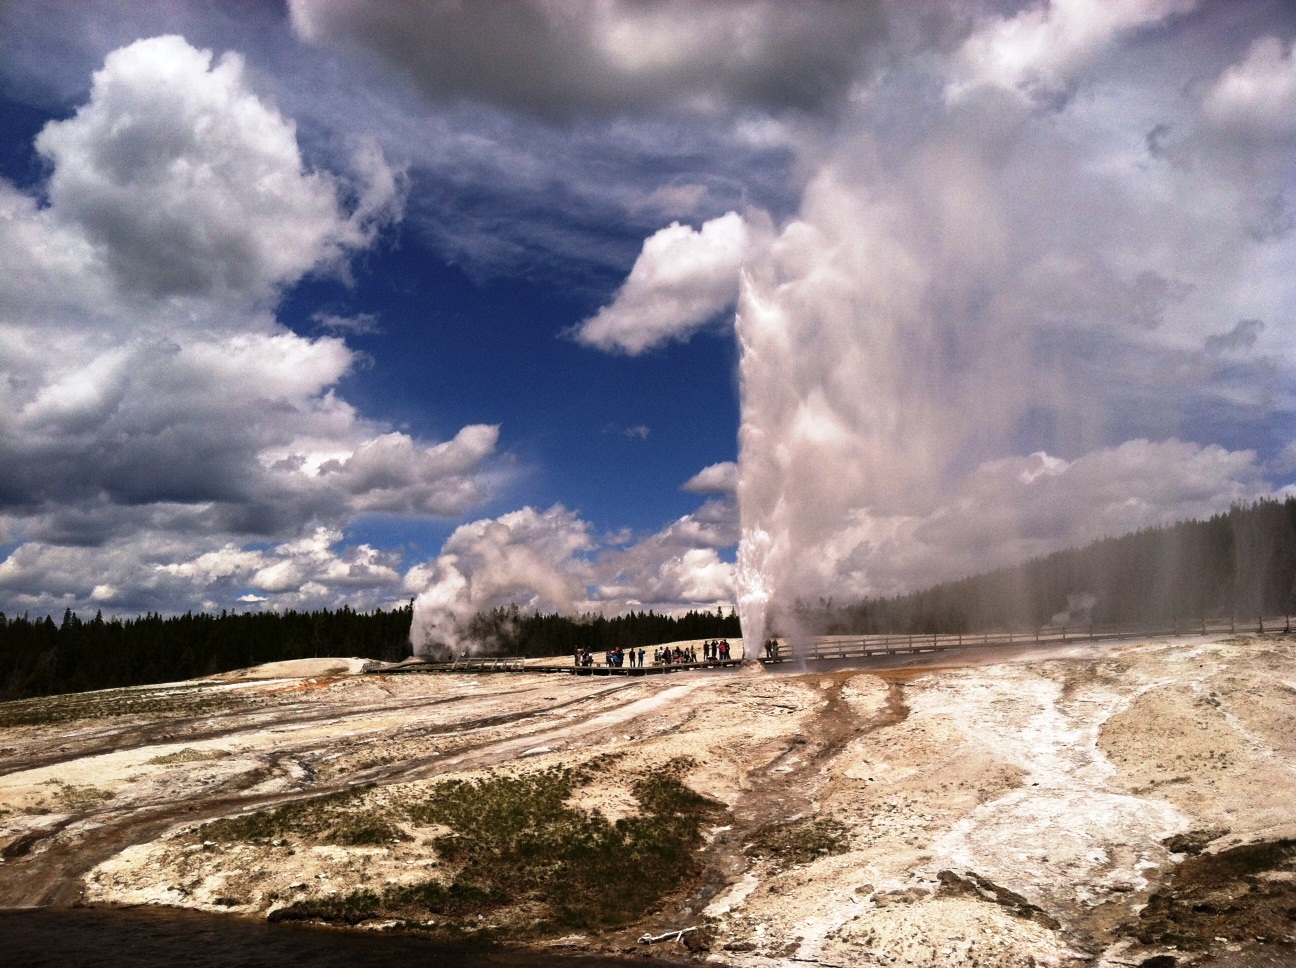 Beehive and Lion Geysers - June 14, 2014